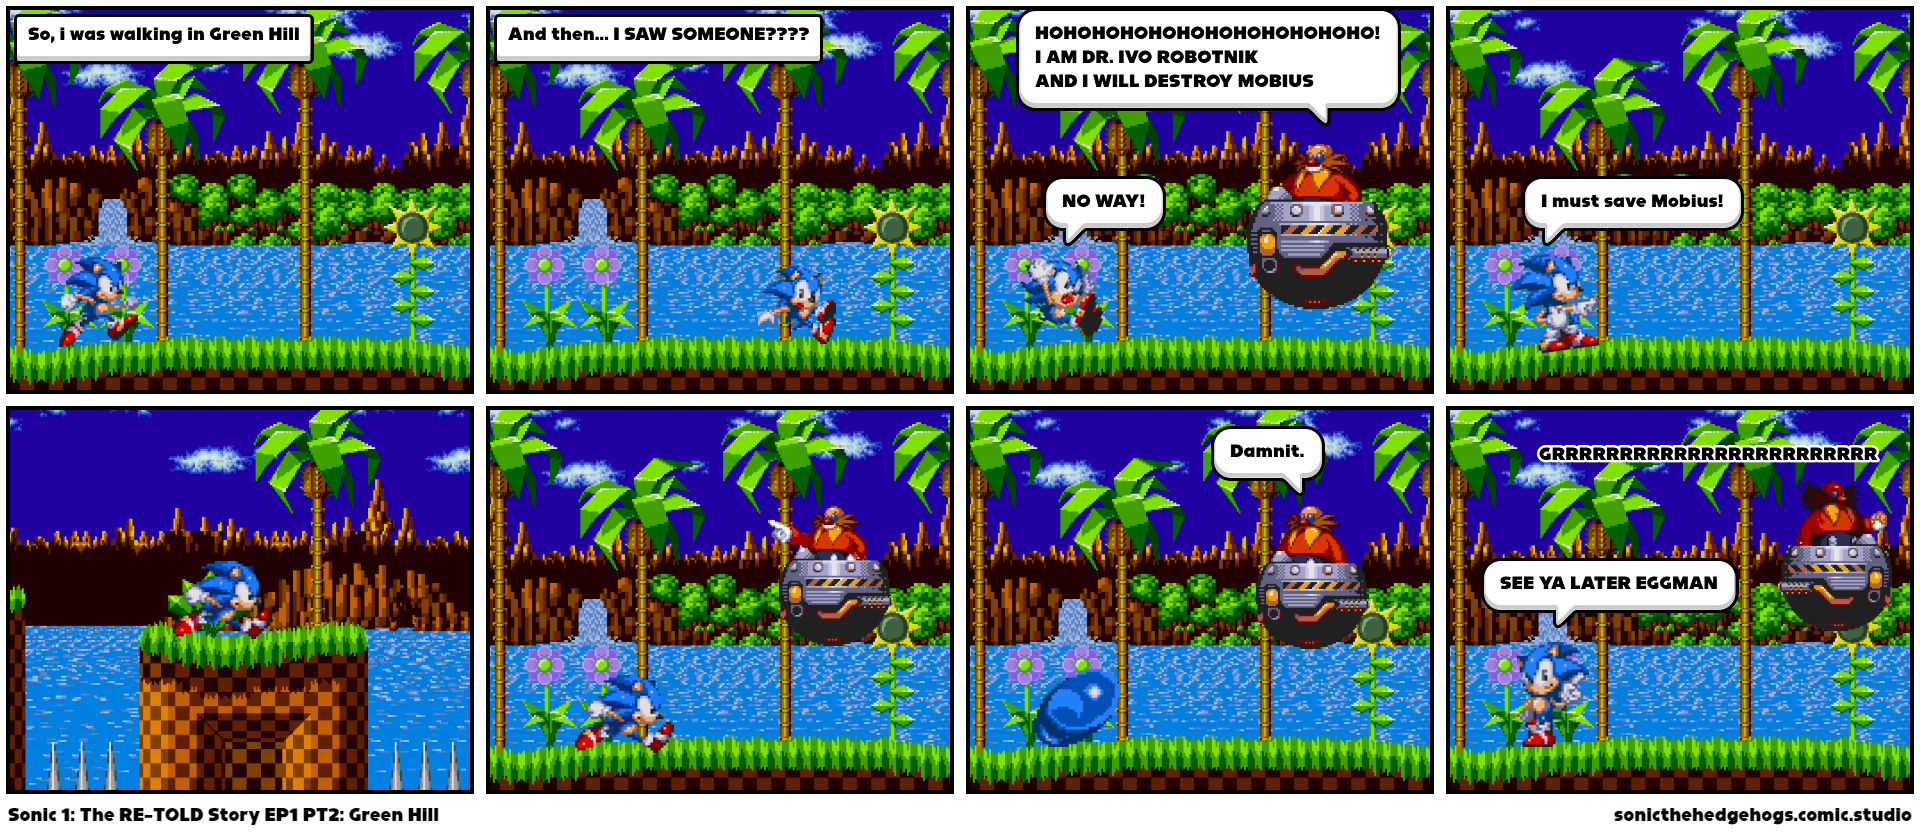 Sonic 1: The RE-TOLD Story EP1 PT2: Green Hill